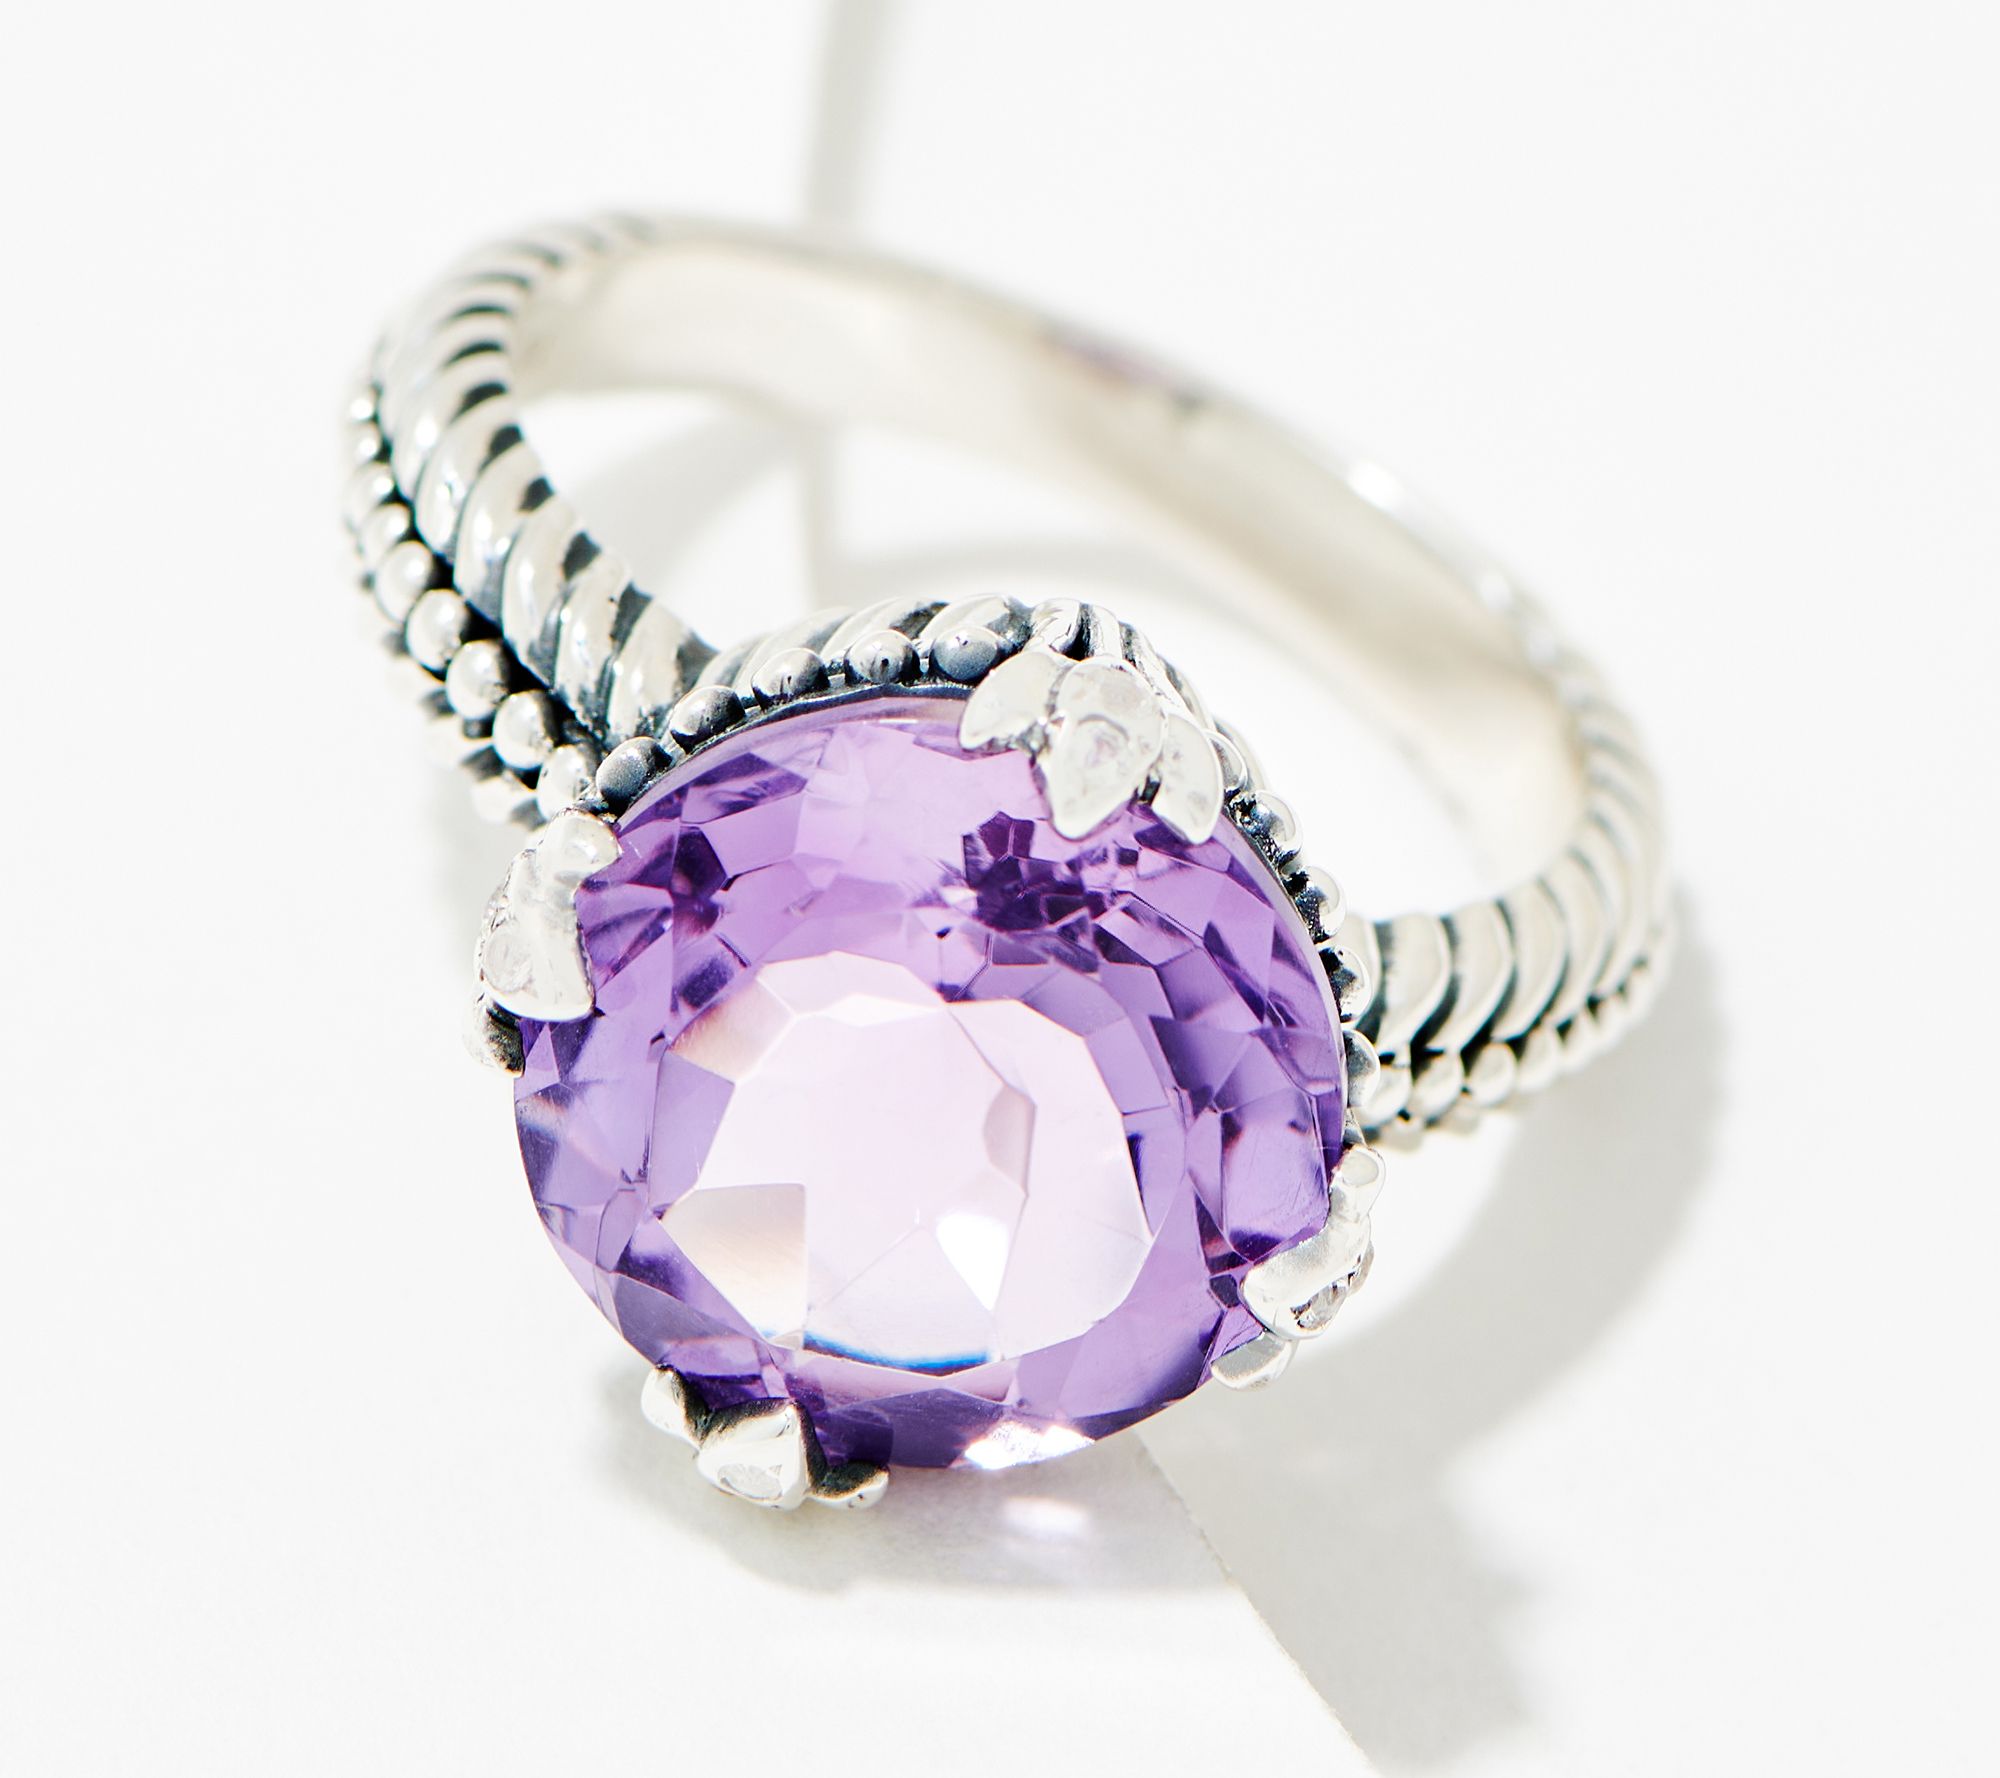 Manse Silver Amethyst Solitaire Ring Robert Artisan by Pink Sterling Crafted